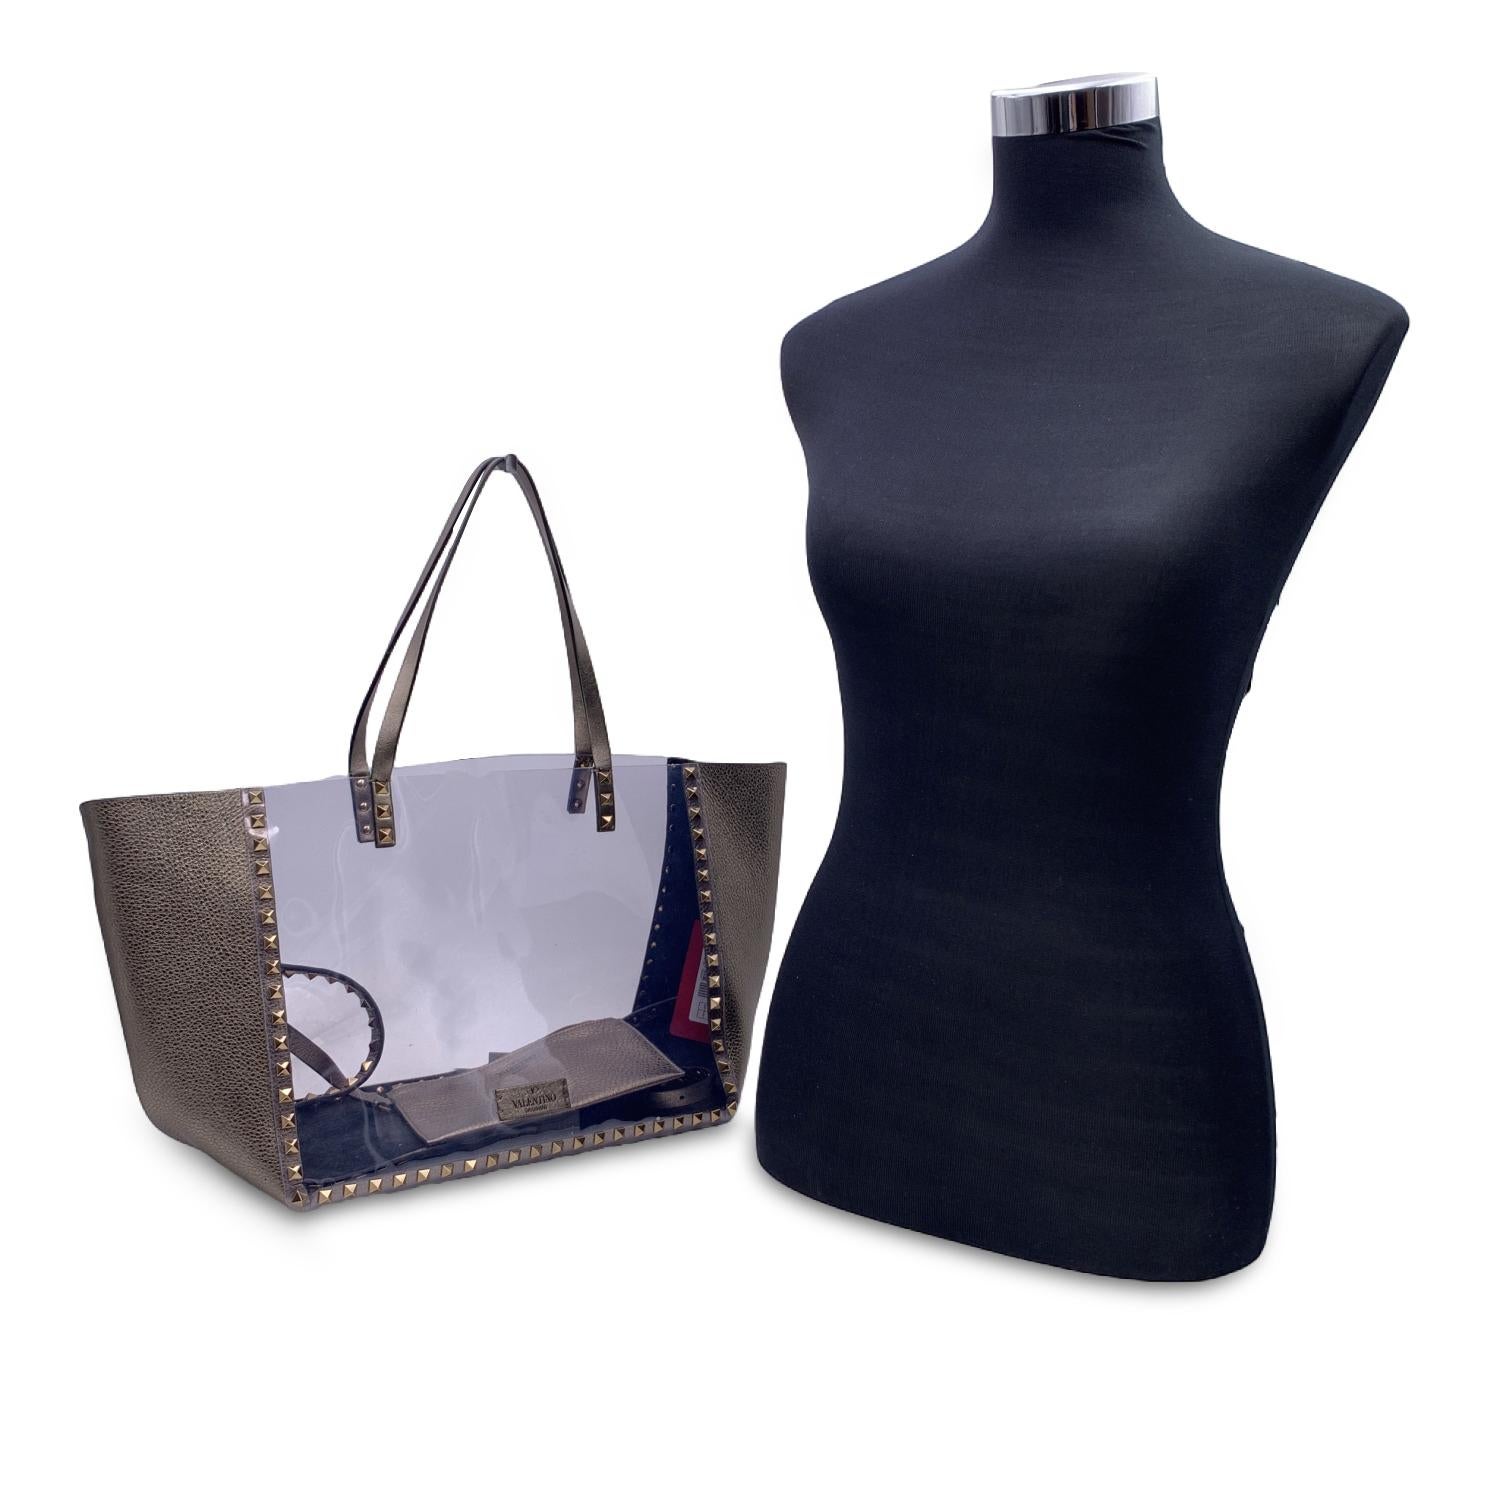 This beautiful Bag will come with a Certificate of Authenticity provided by Entrupy. The certificate will be provided at no further cost

VALENTINO GARAVANI 'Rockstud' tote bag. Clear plastic and metallic grey leather side panels, bottom and